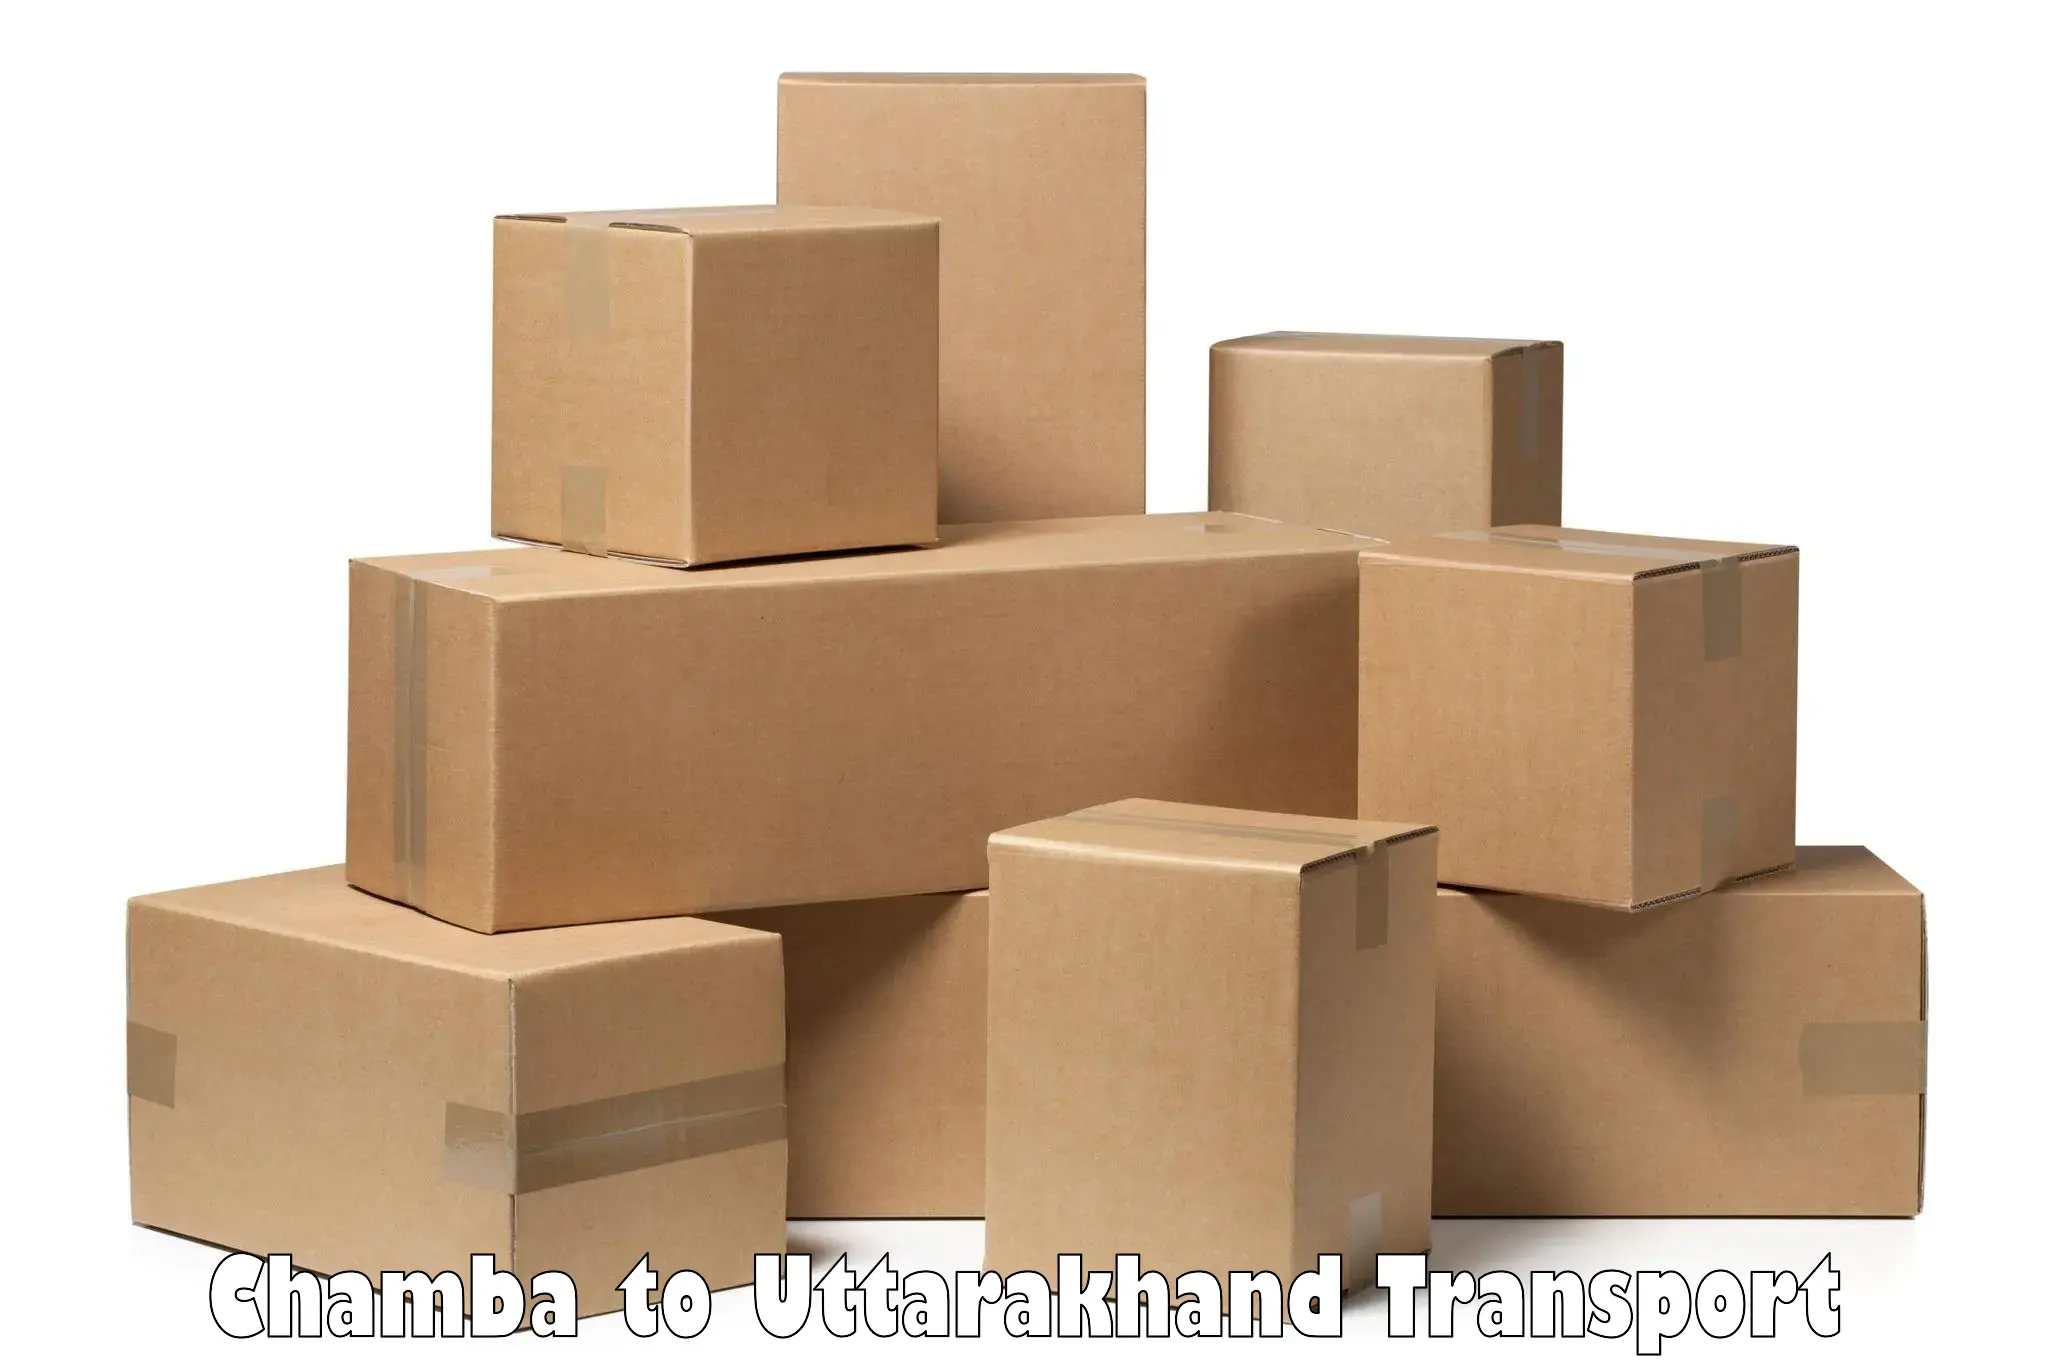 Parcel transport services in Chamba to Haridwar